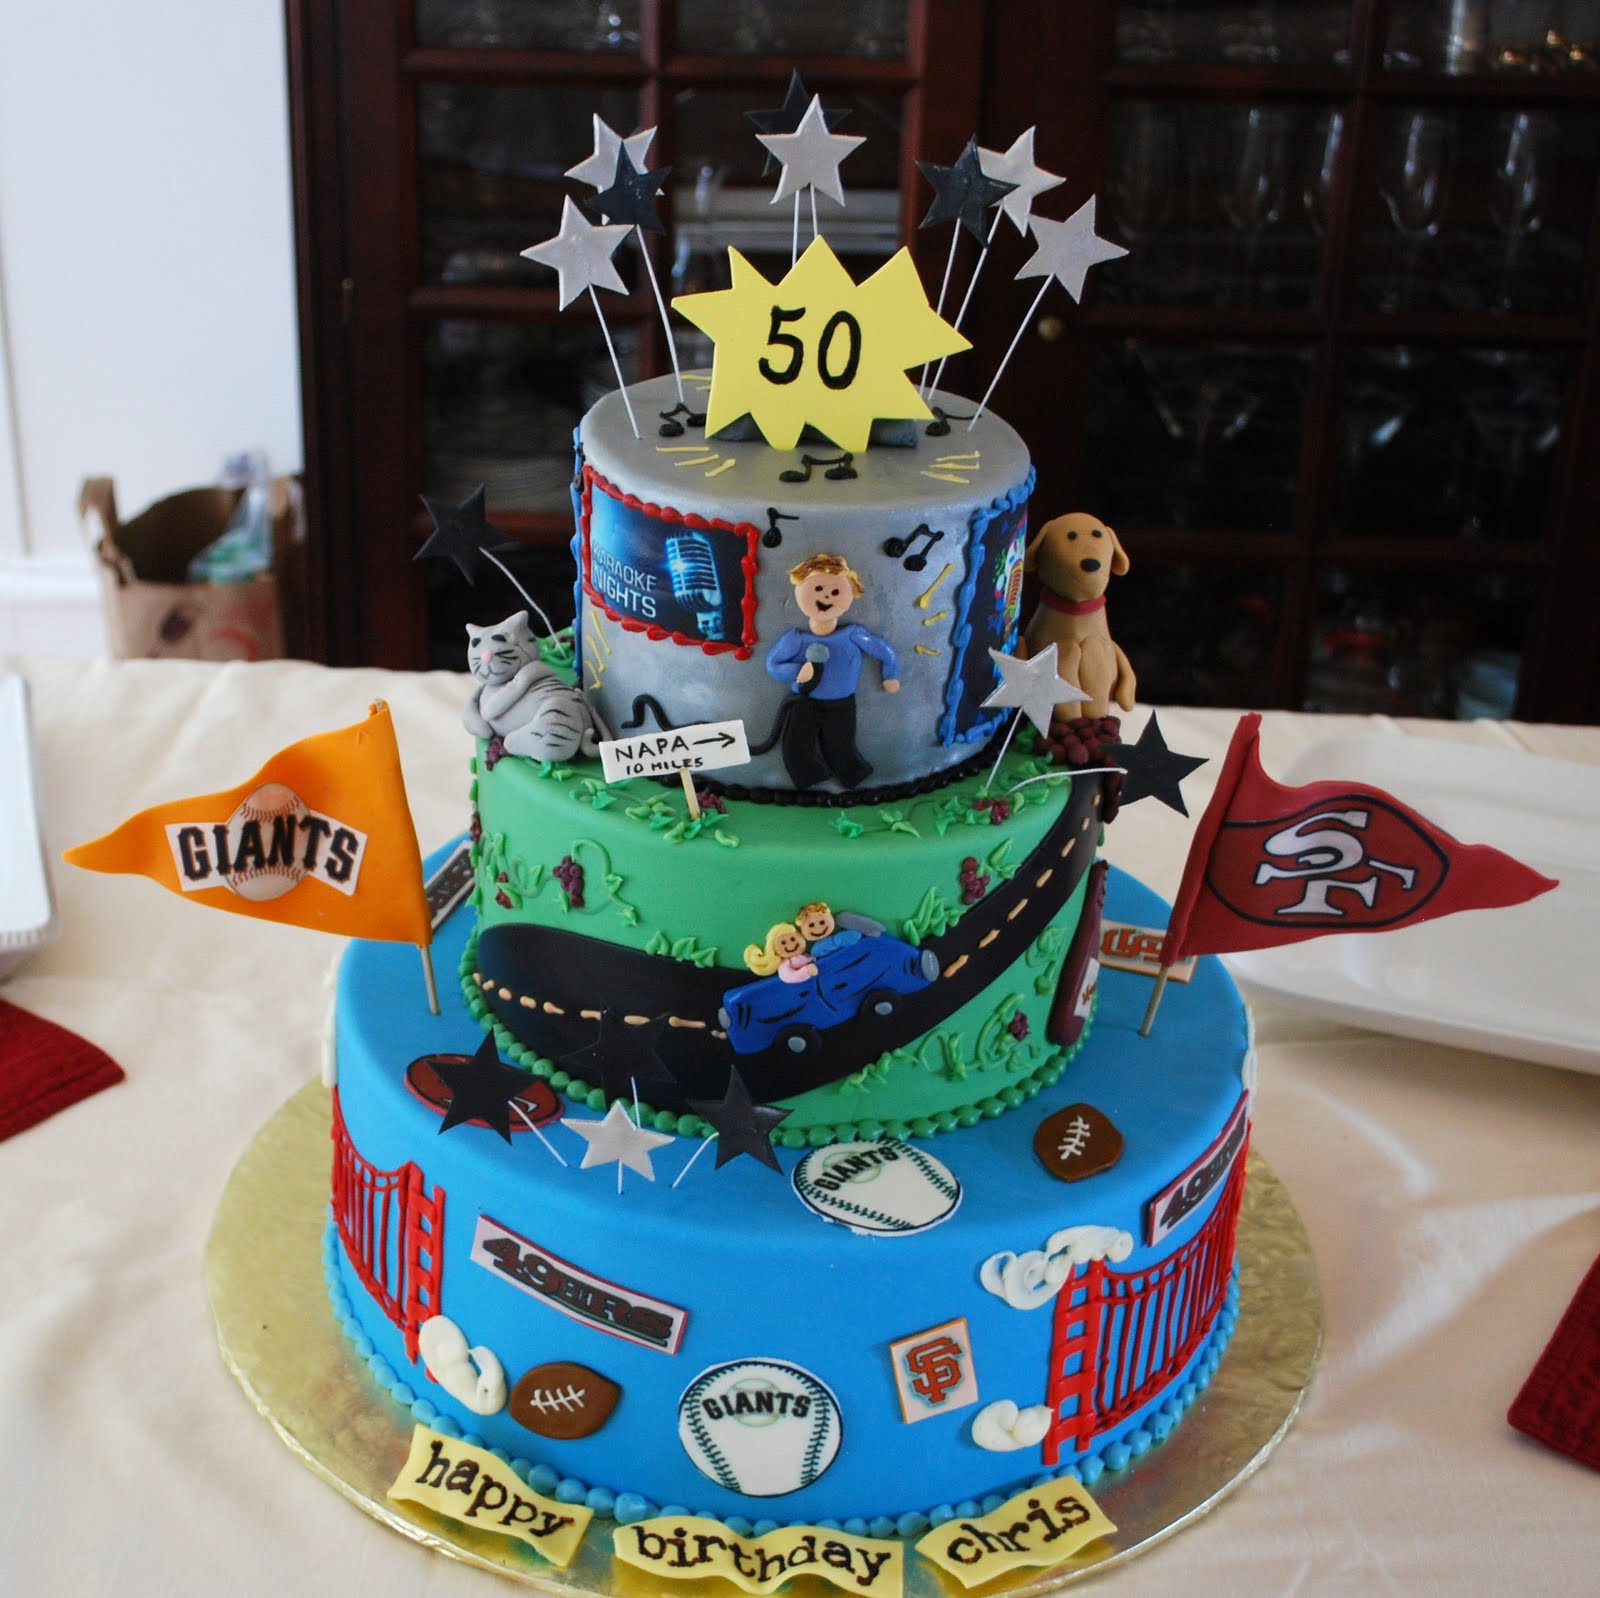 50th Birthday Cake Ideas For Him
 The Beehive 50th Birthday Cake